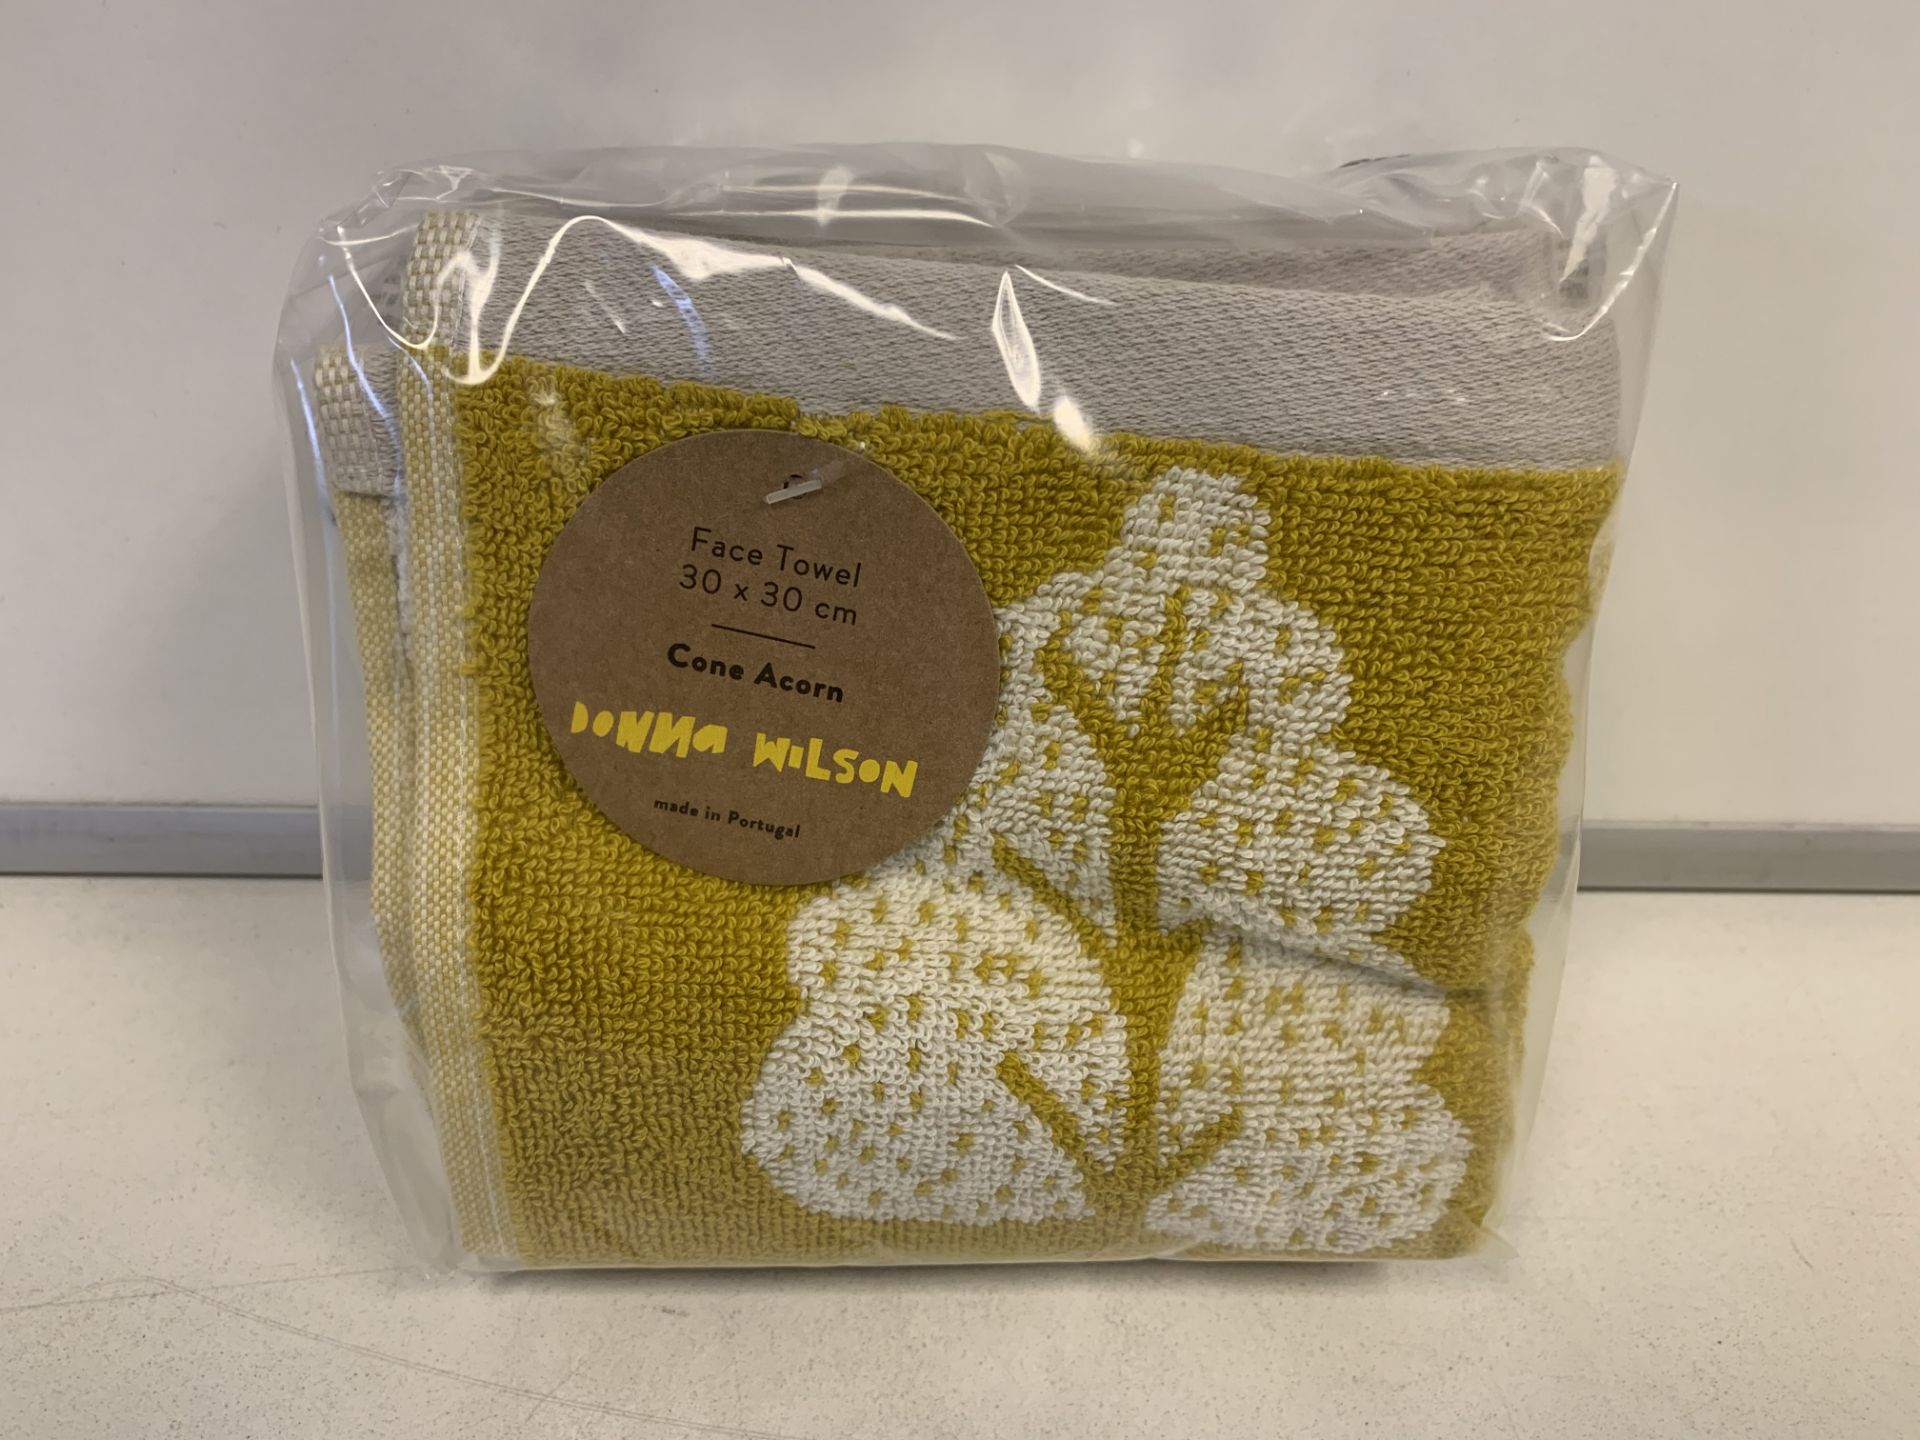 60 X BRAND NEW BOXED DONNA WILSON CONE ACORN TAWNY FACE TOWELS 30 X 30CM RRP £5 EACH